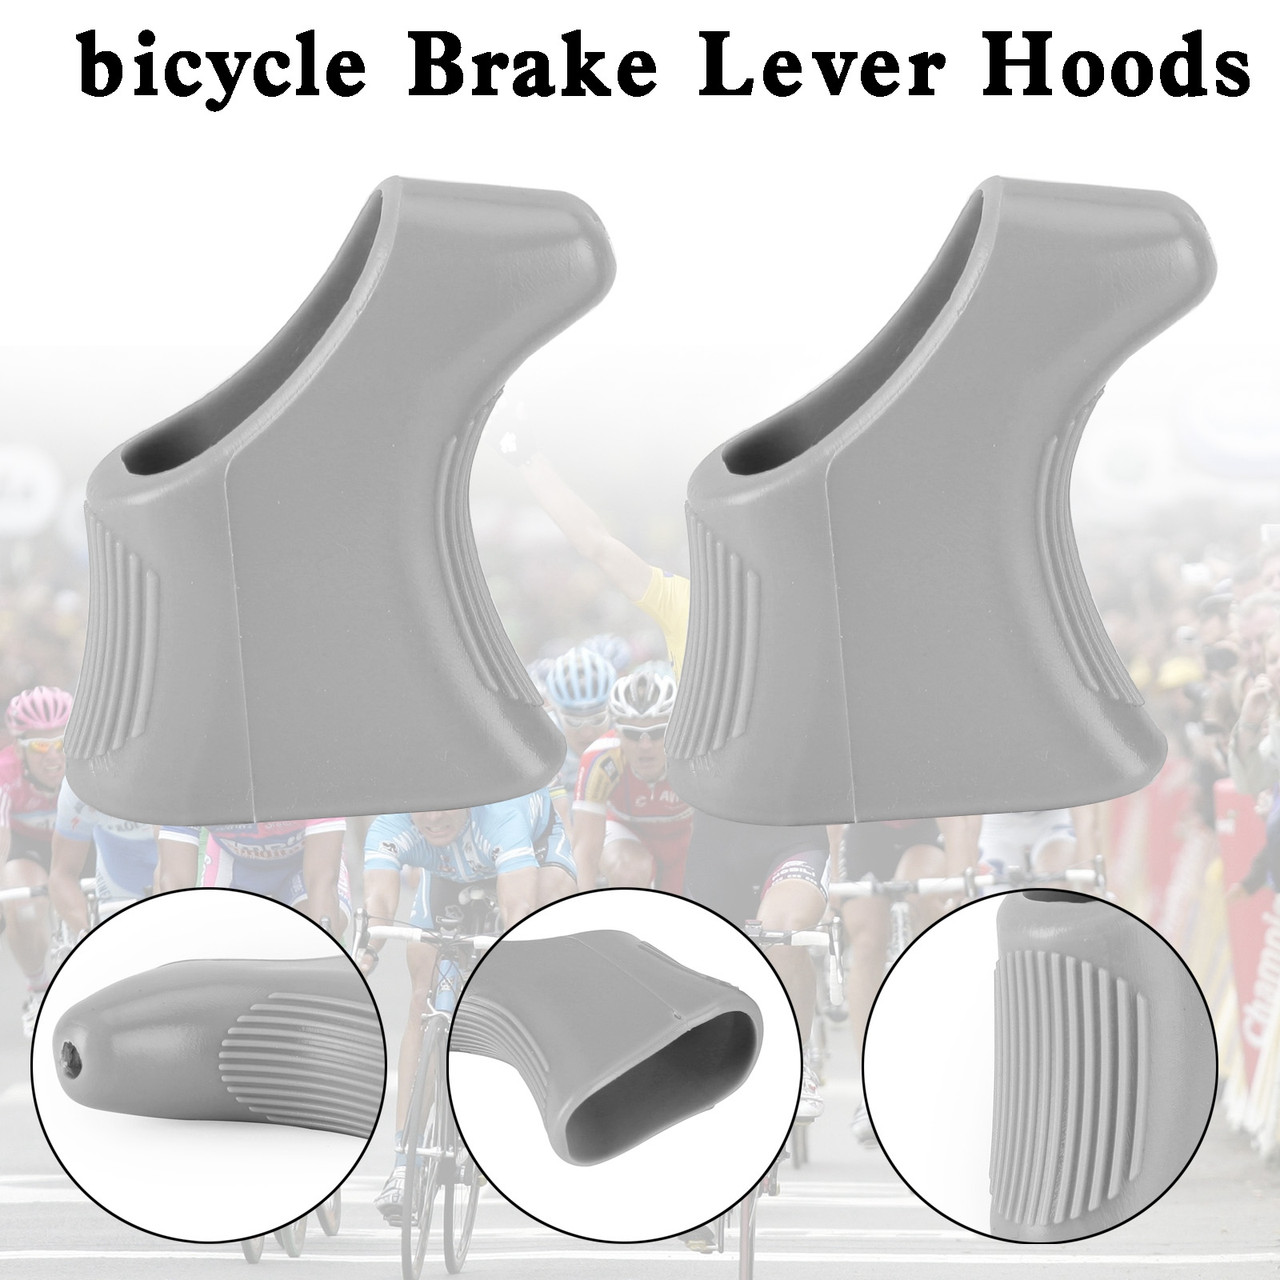 One Pair of Shield Brake Lever Hoods For Super record Gray